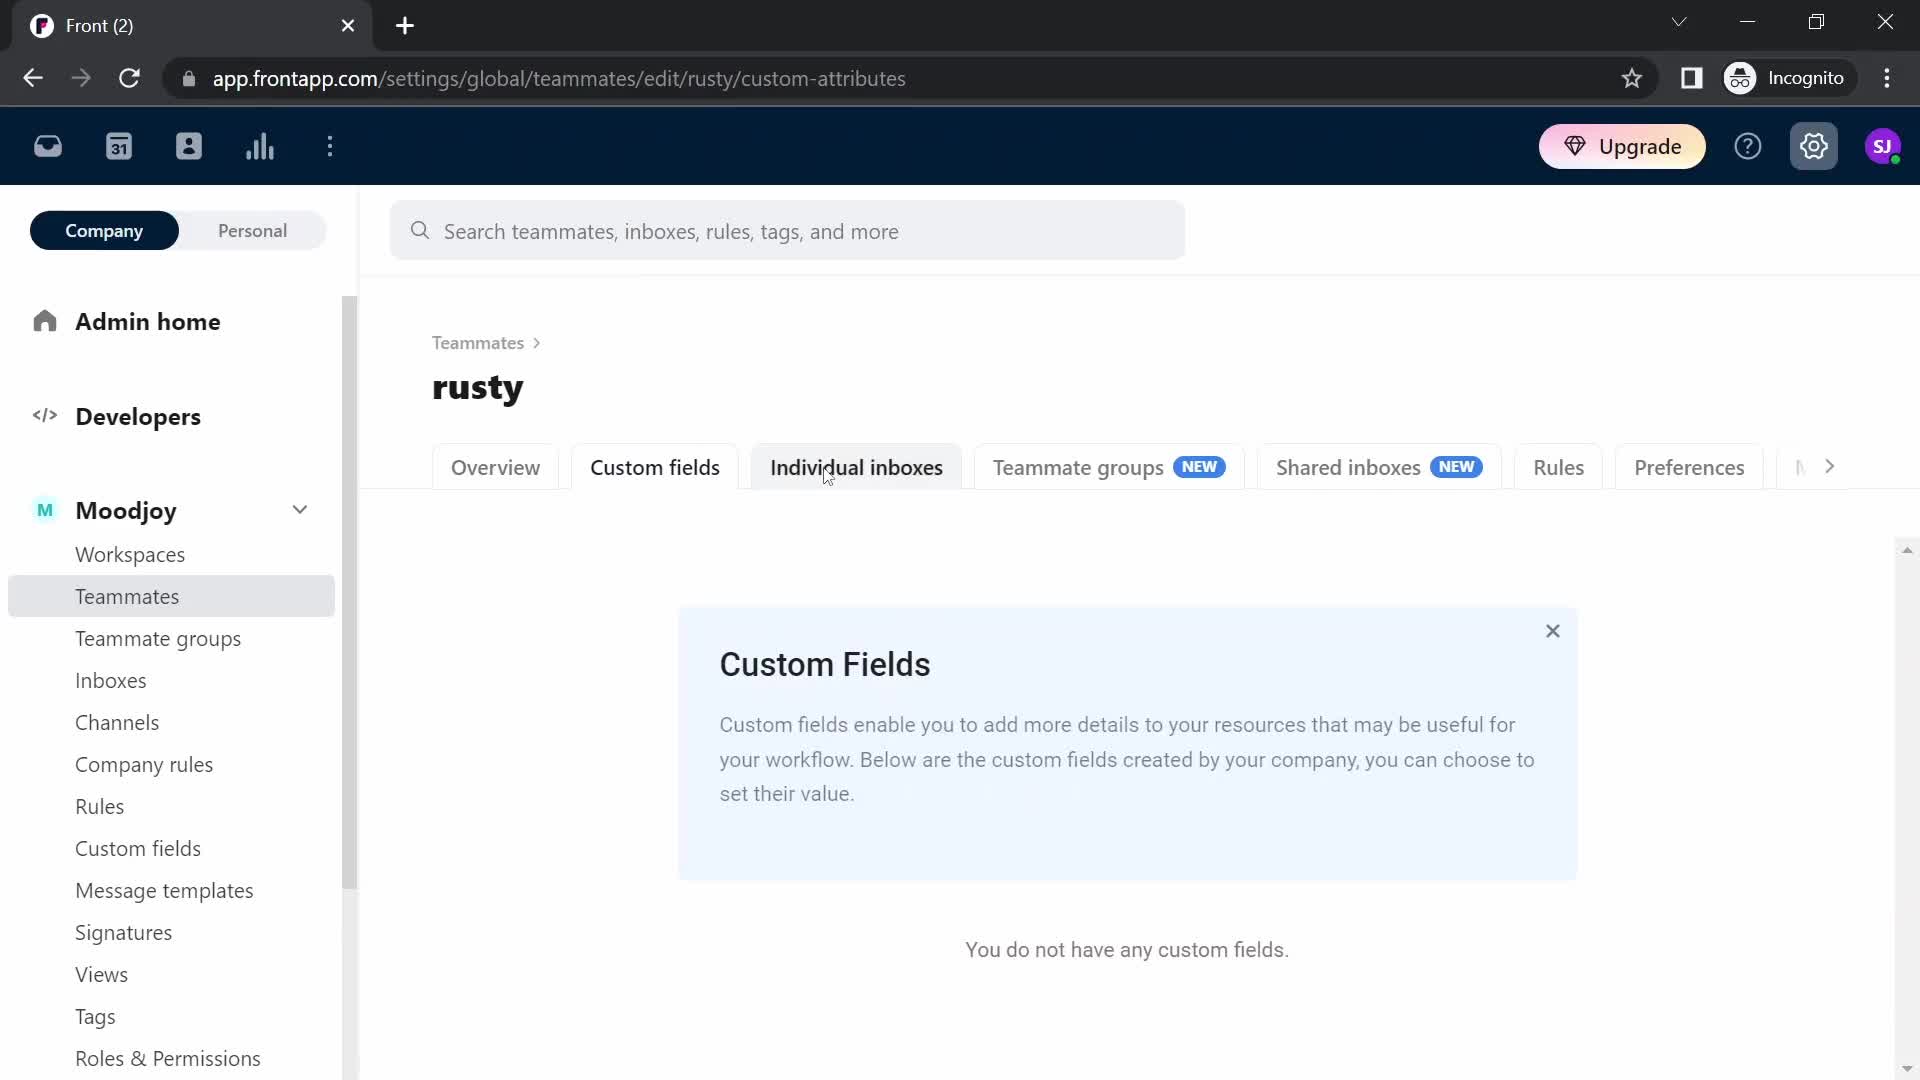 Screenshot of Custom fields on Inviting people on Front user flow